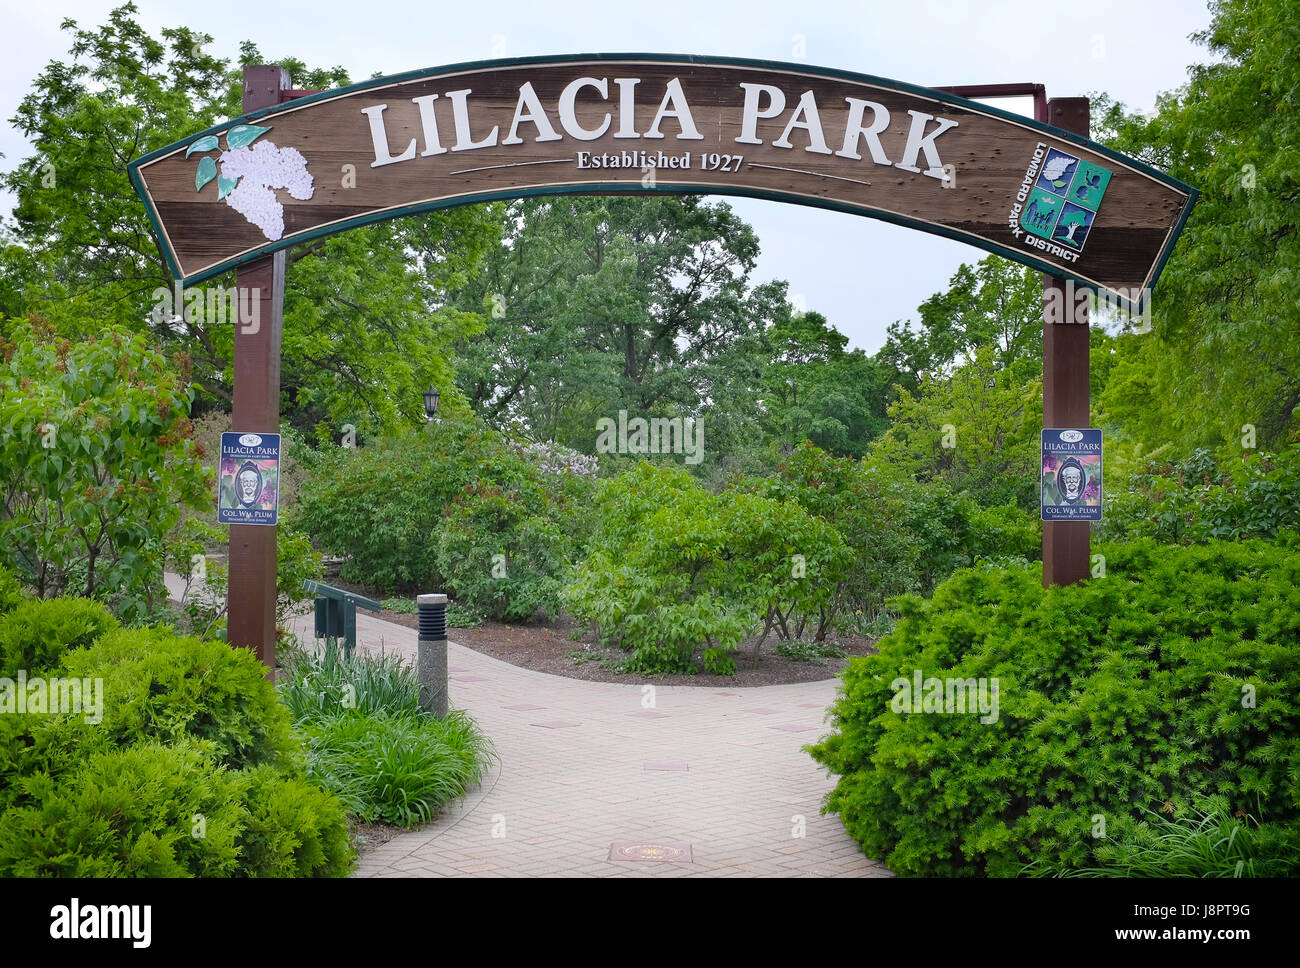 LOMBARD, ILLINOIS - MAY 26, 2017: Lilacia Park entrance sign. Once home to Colonel William R. Plum's lilac garden the park was bequeathed on the passi Stock Photo